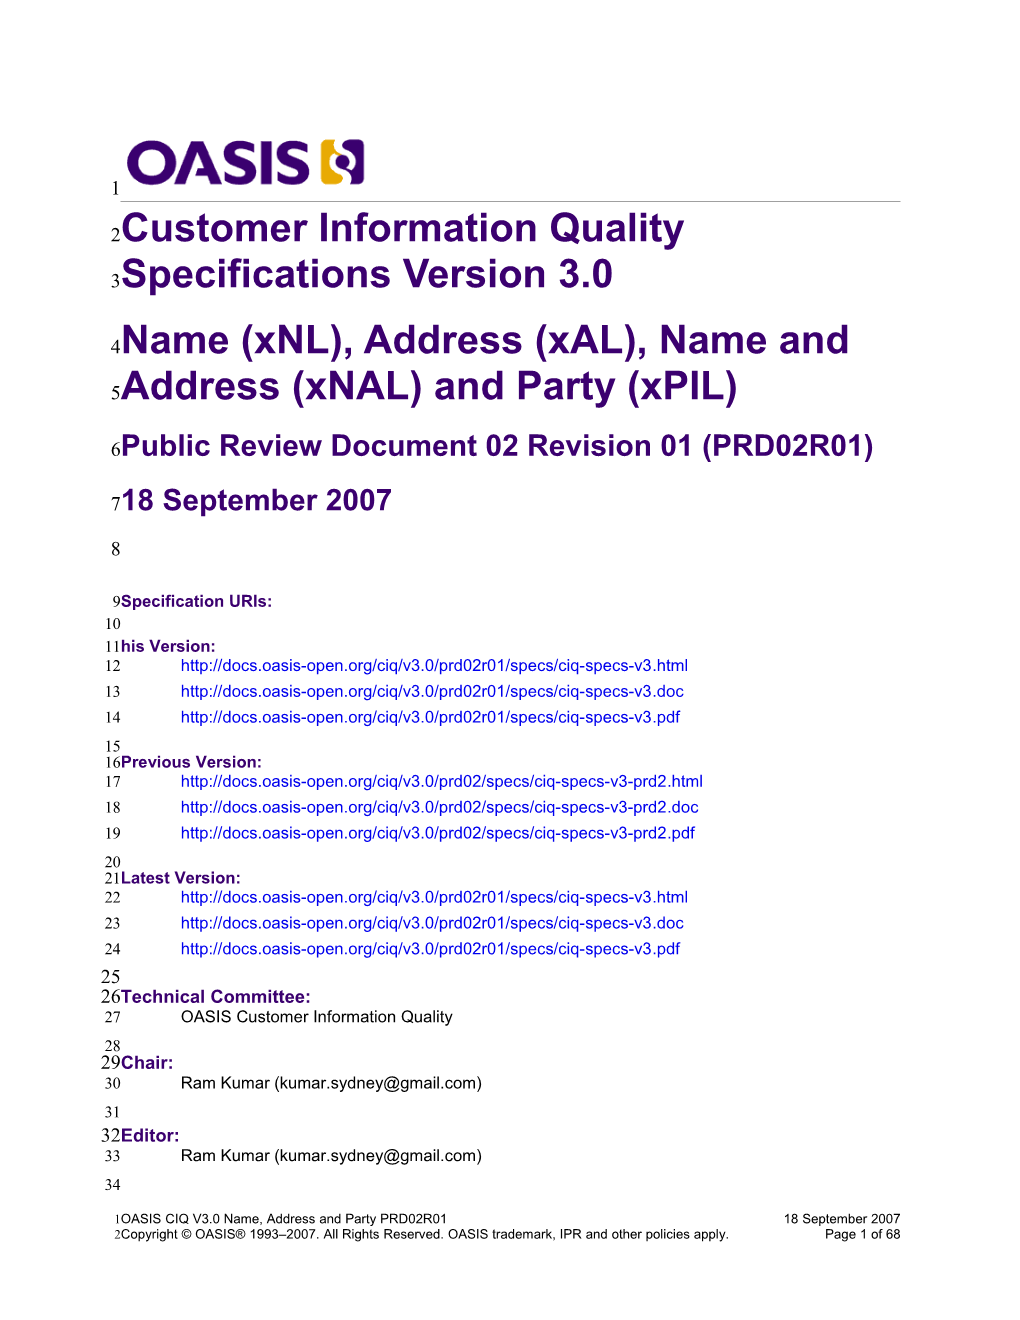 Customer Information Quality Specifications Version 3.0 - Name, Address and Party